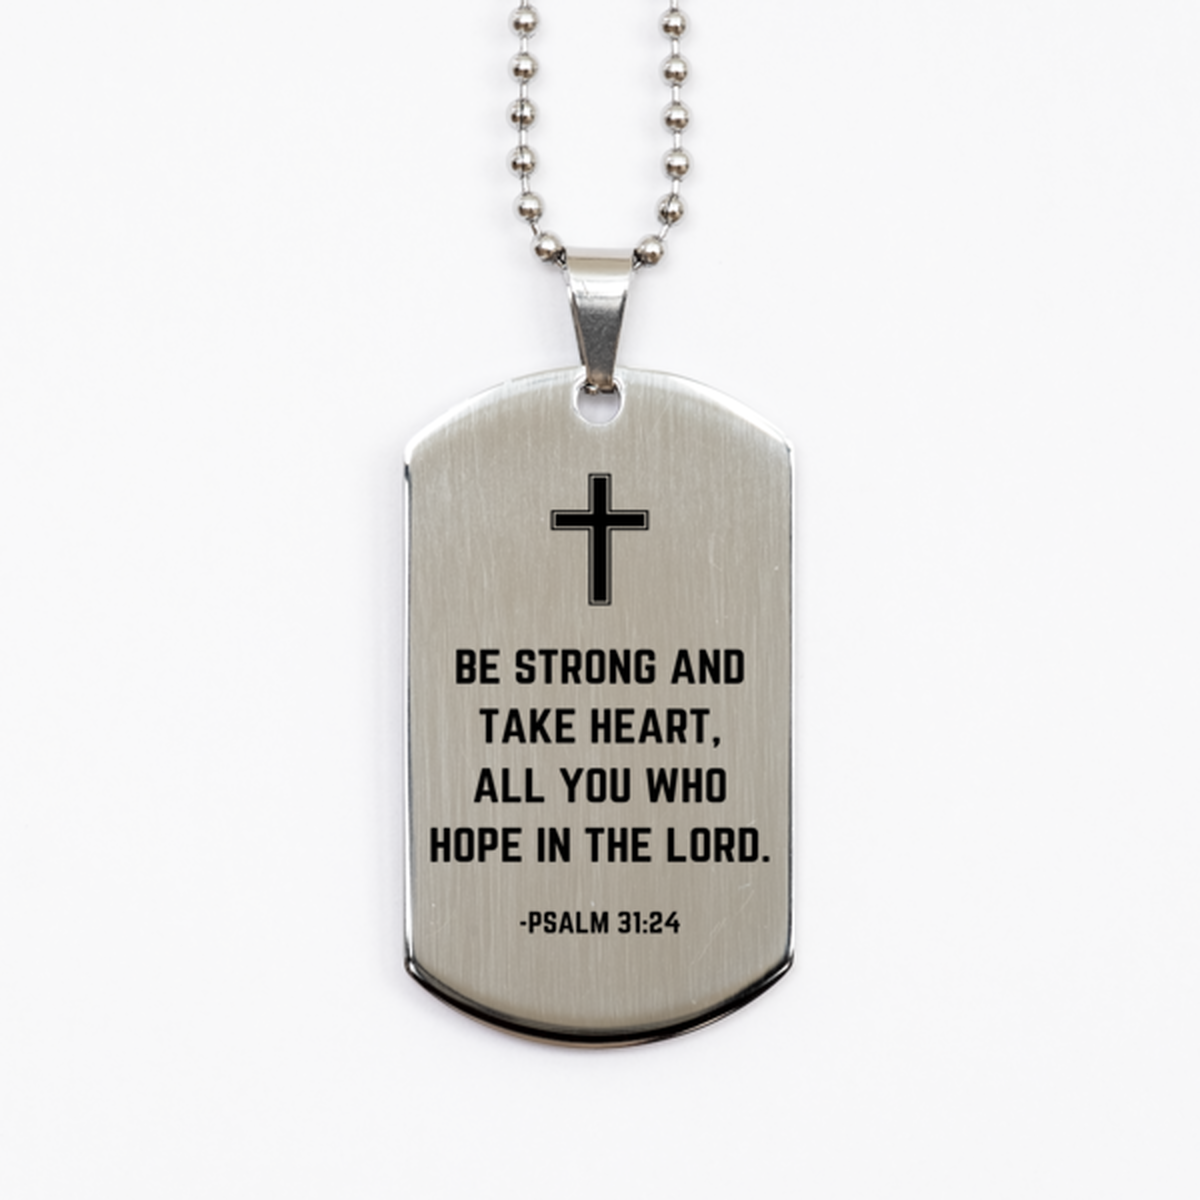 Baptism Gifts For Teenage Boys Girls, Christian Bible Verse Silver Dog Tag, Be strong and take heart, Confirmation Gifts, Bible Verse Necklace for Son, Godson, Grandson, Nephew